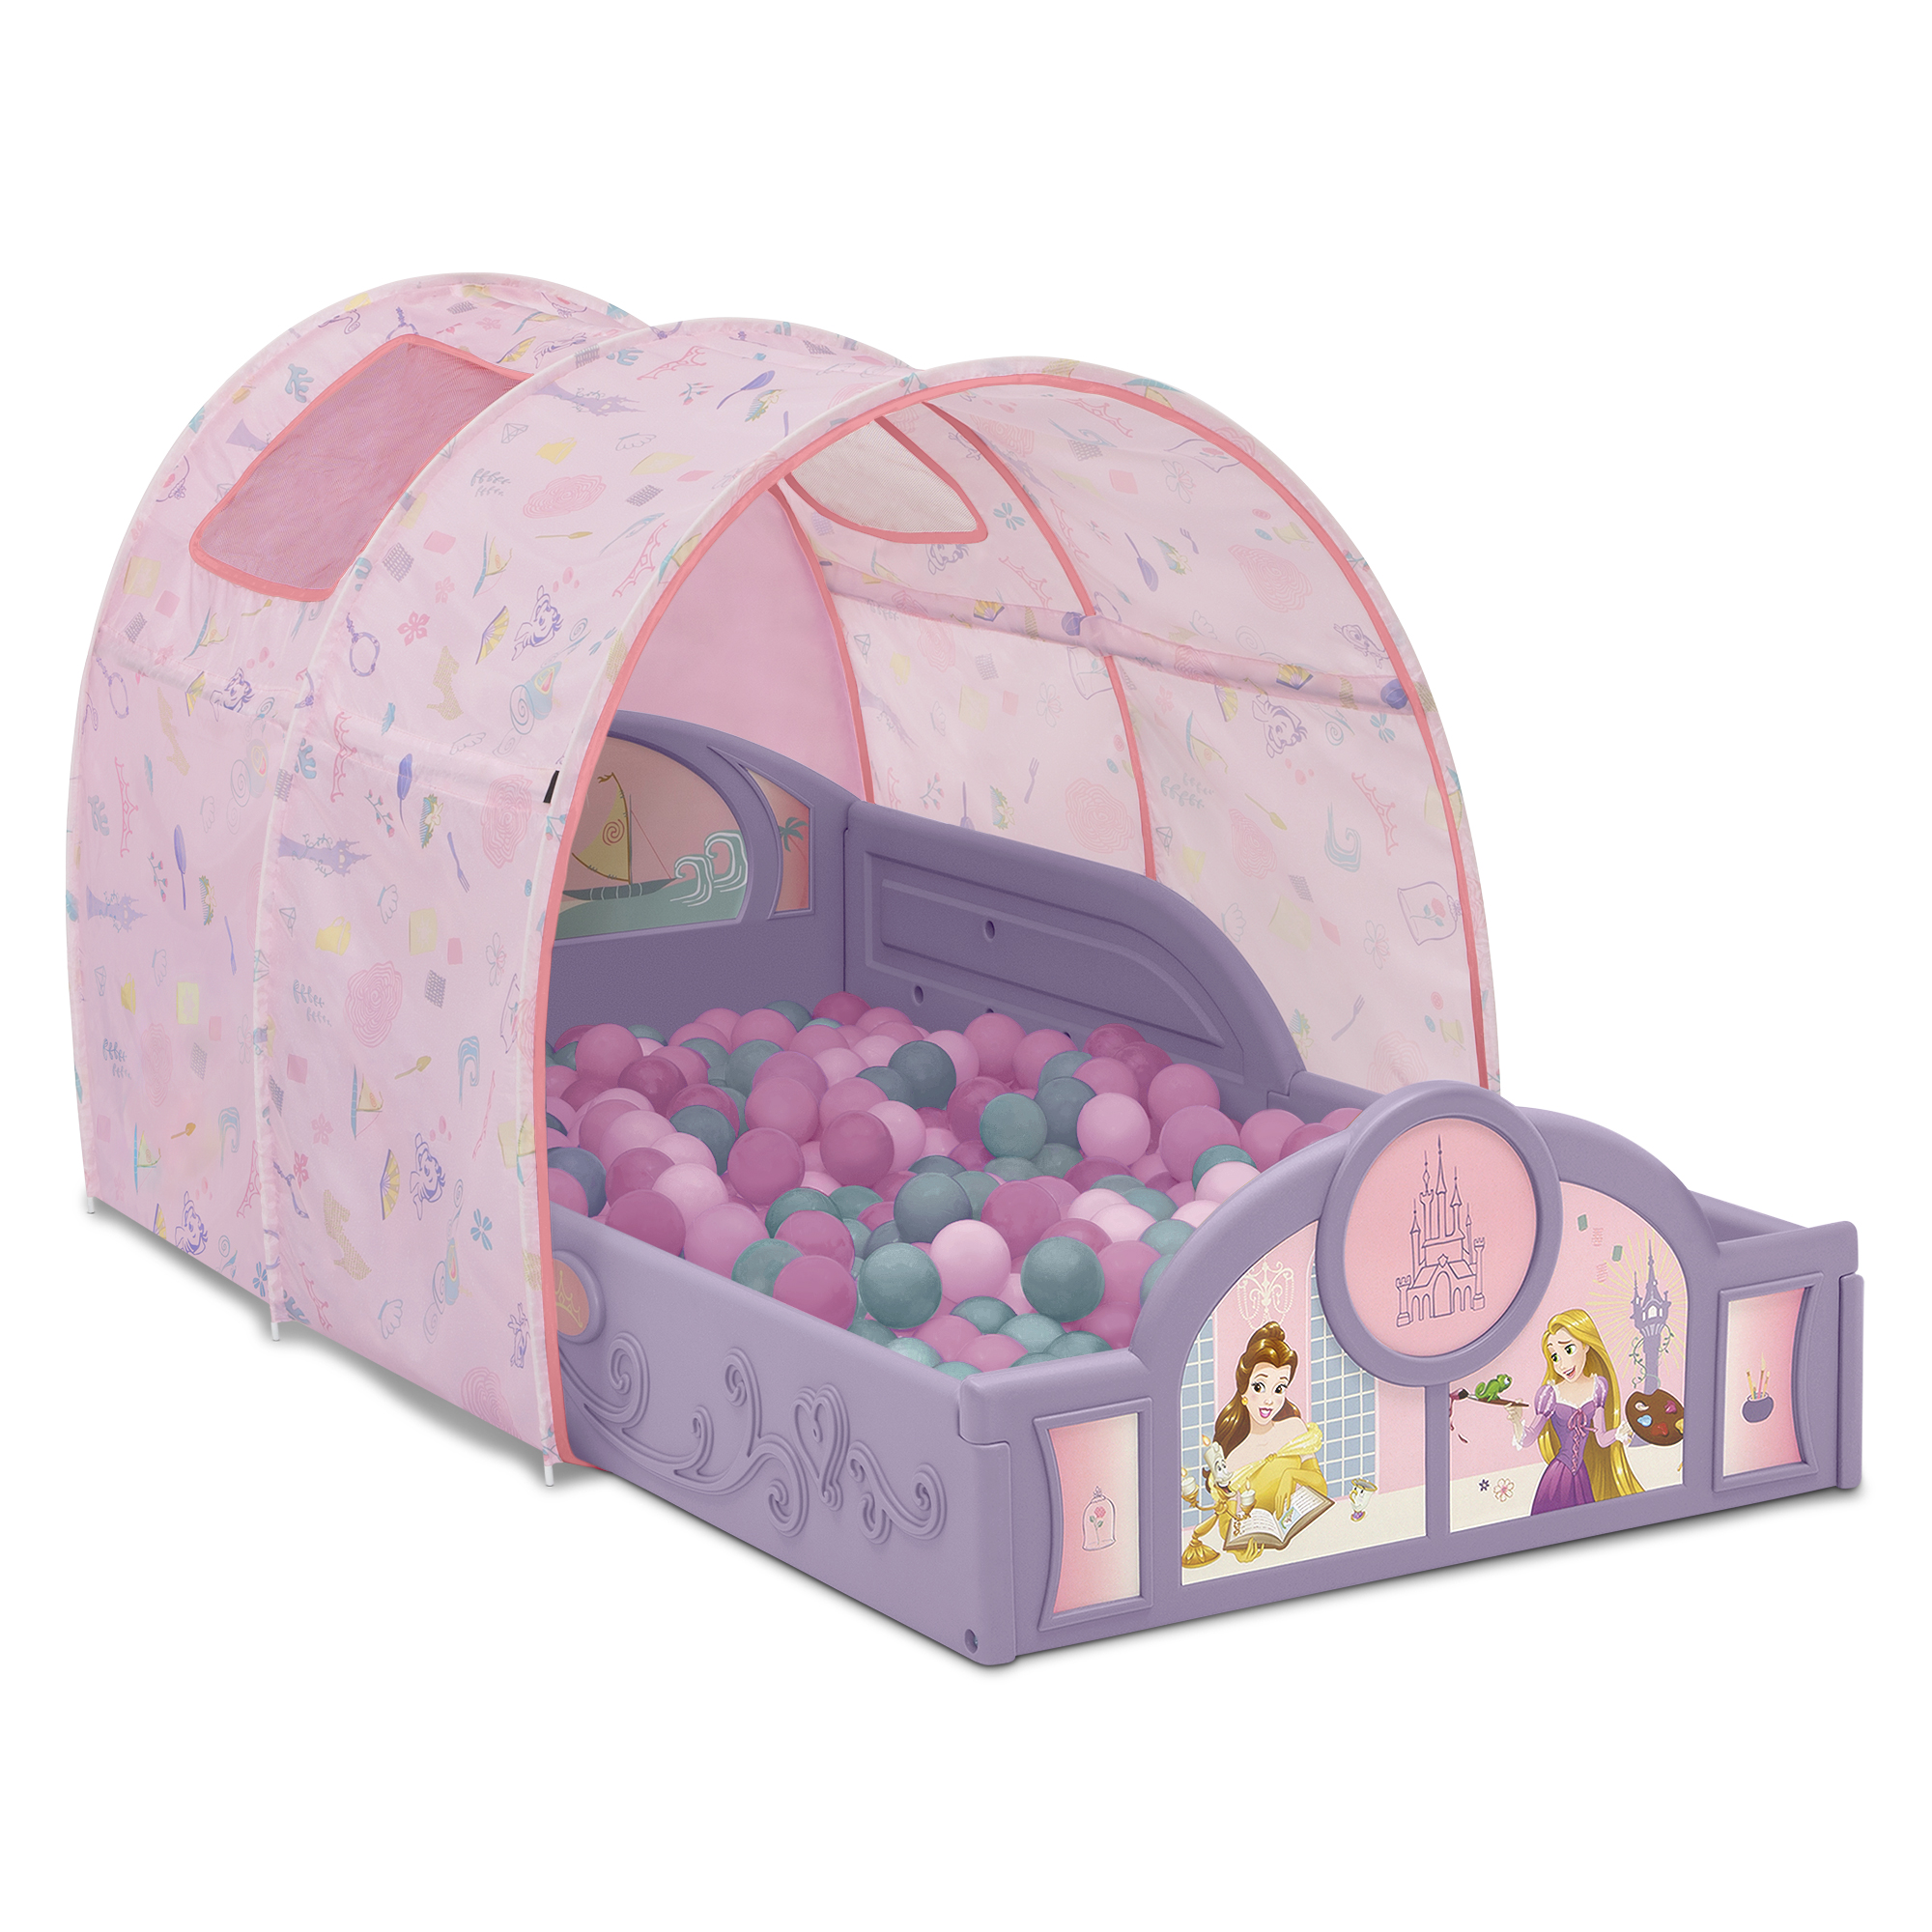 Disney Princess Sleep and Play Toddler Bed with Tent by Delta Children, Purple/Pink - image 4 of 7